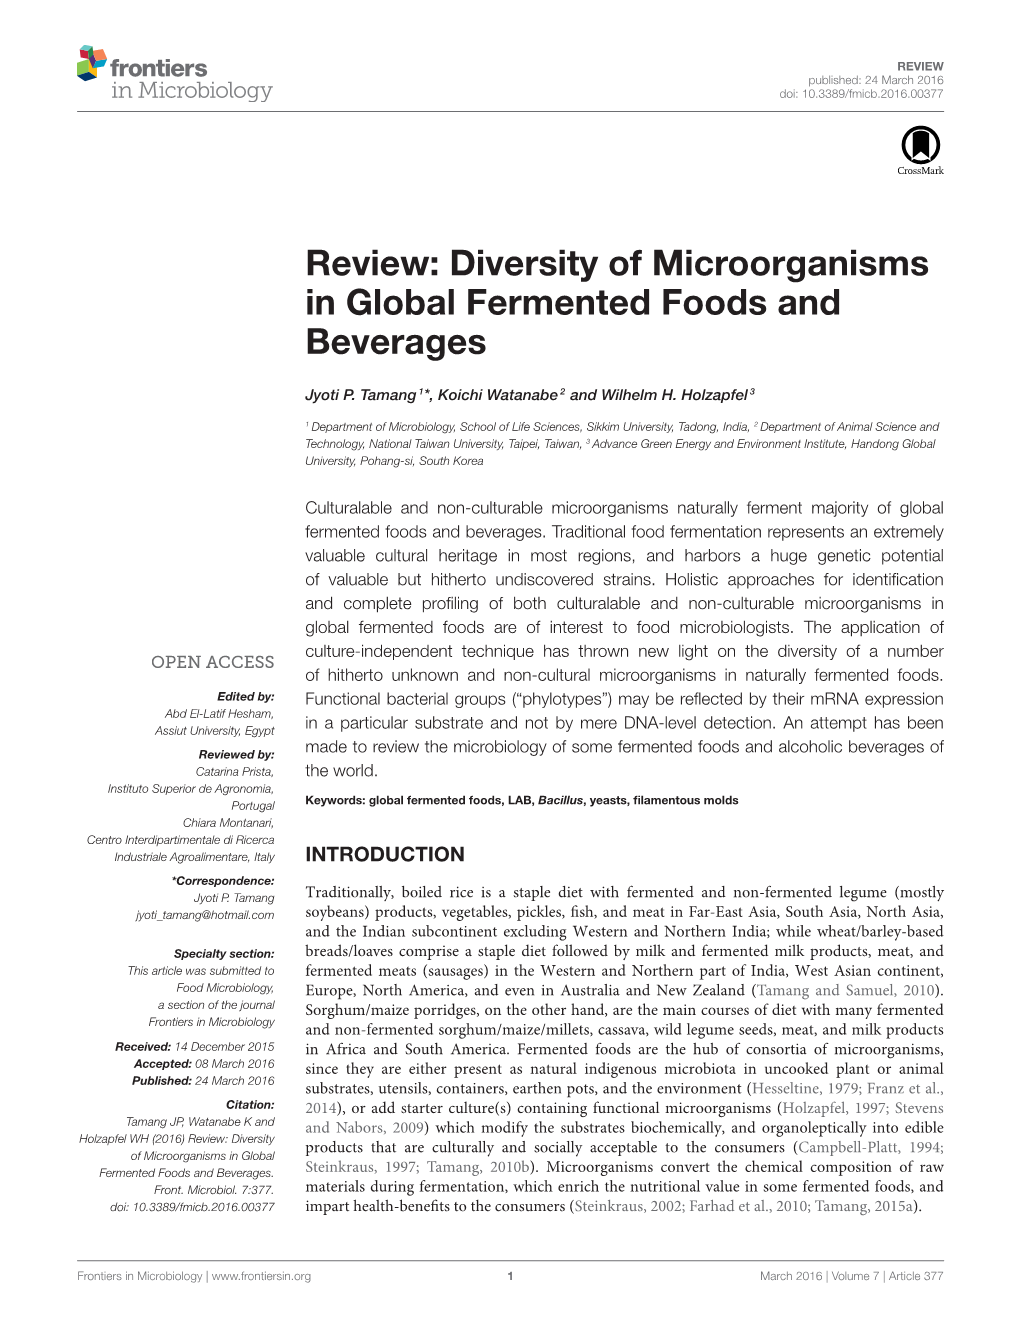 Diversity of Microorganisms in Global Fermented Foods and Beverages